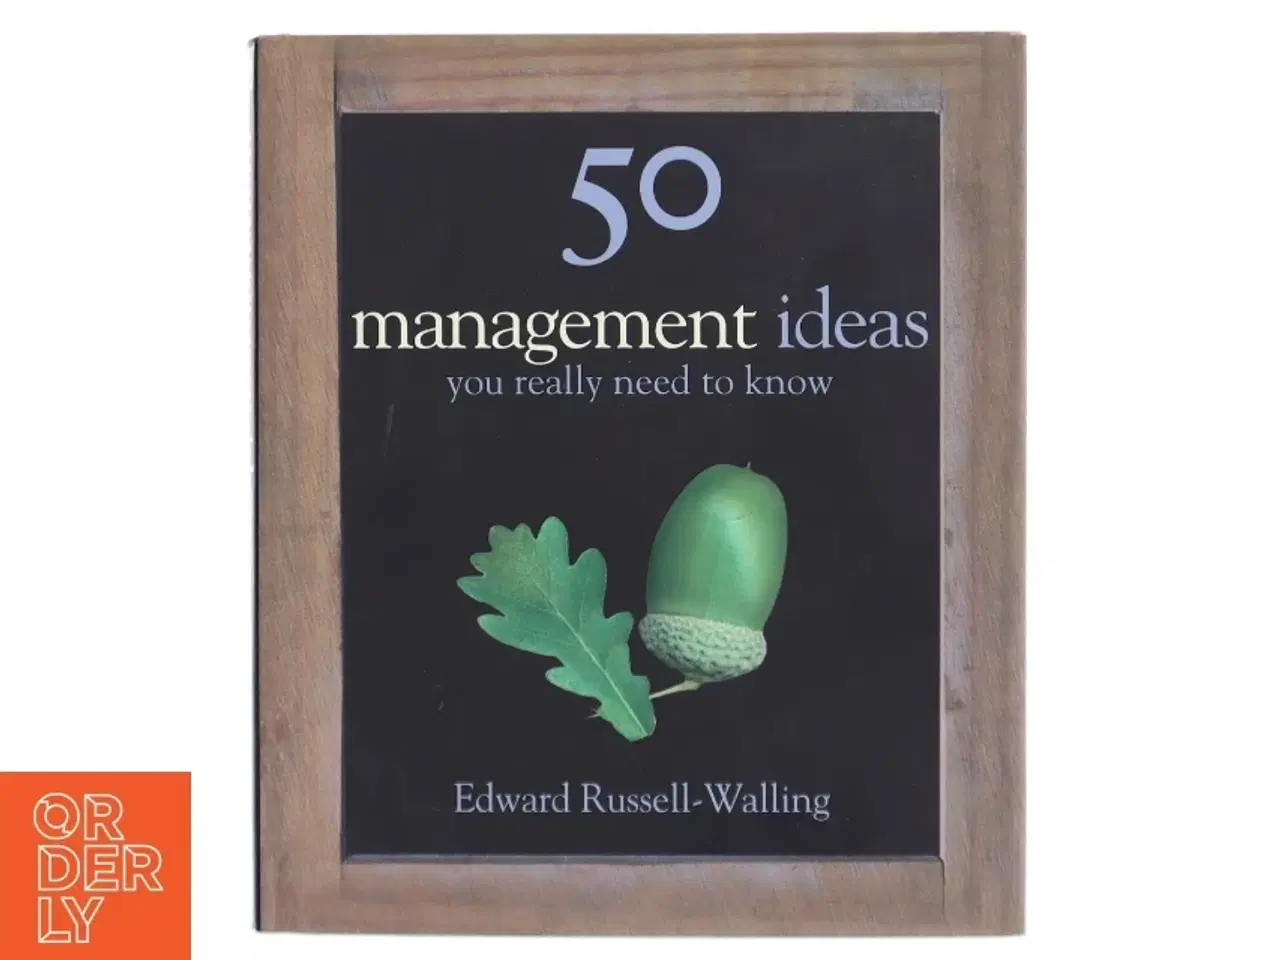 Billede 1 - 50 management ideas you really need to know af Edward Russell-Walling (Bog)